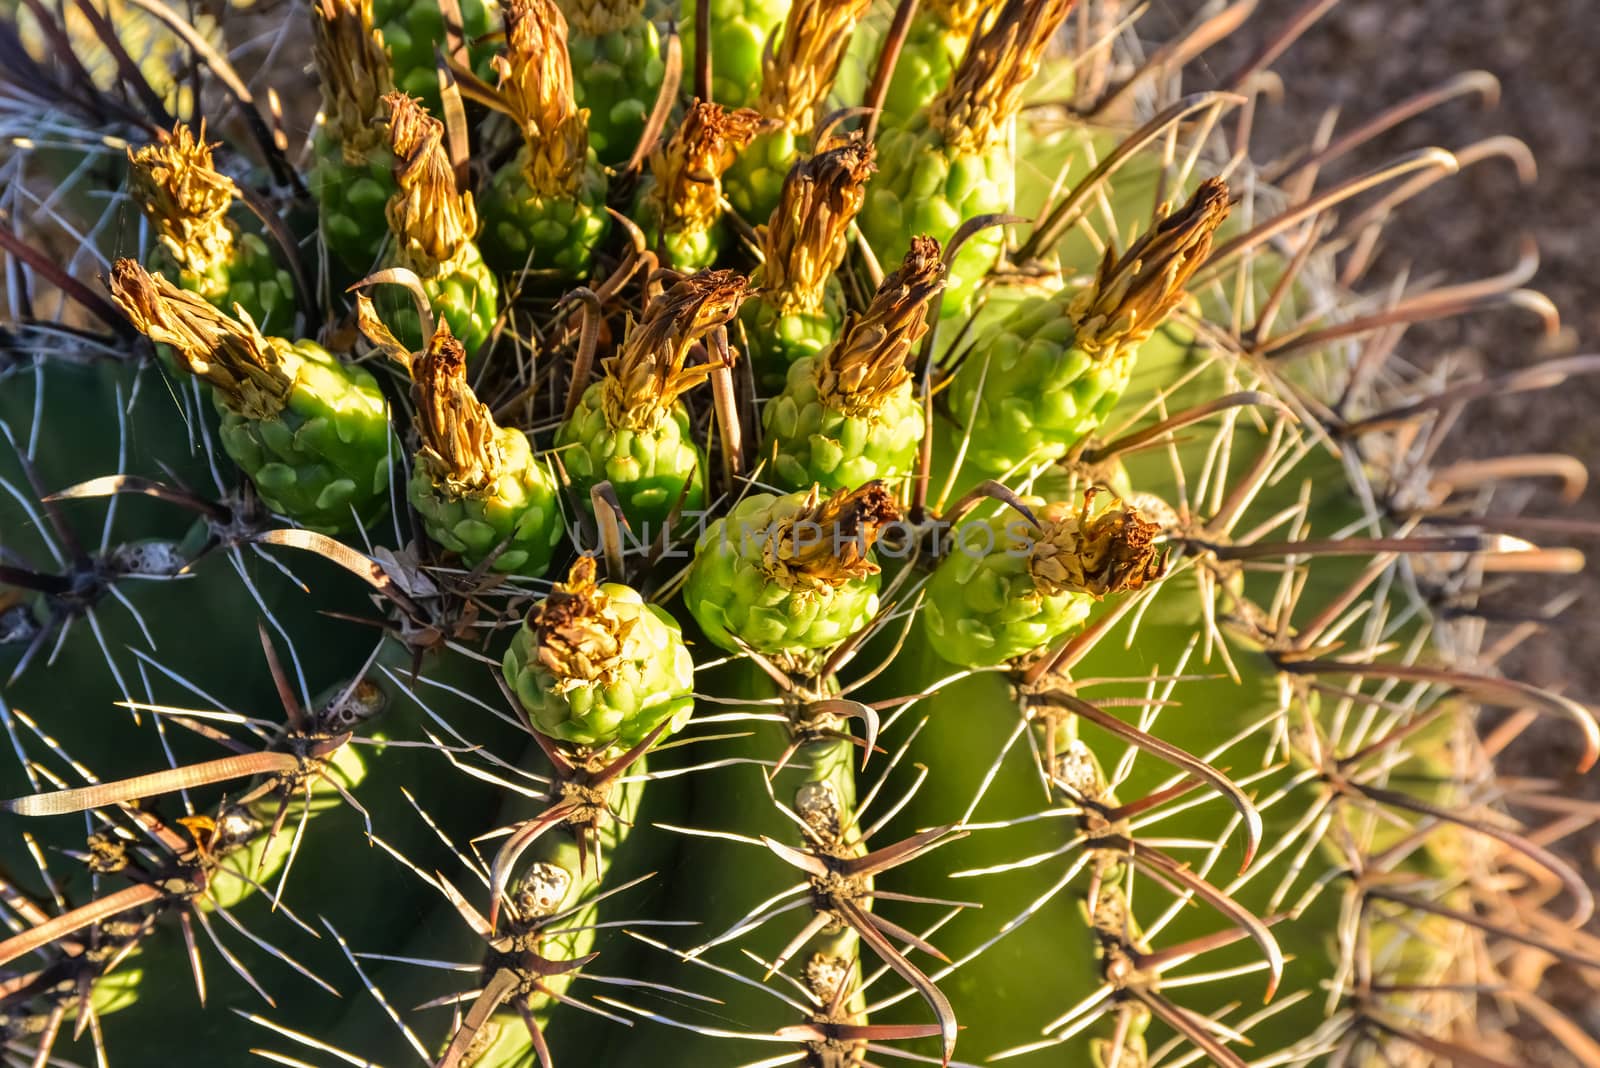 Yellow fruits with seeds on top of a large cactus Ferocactus. by Hydrobiolog